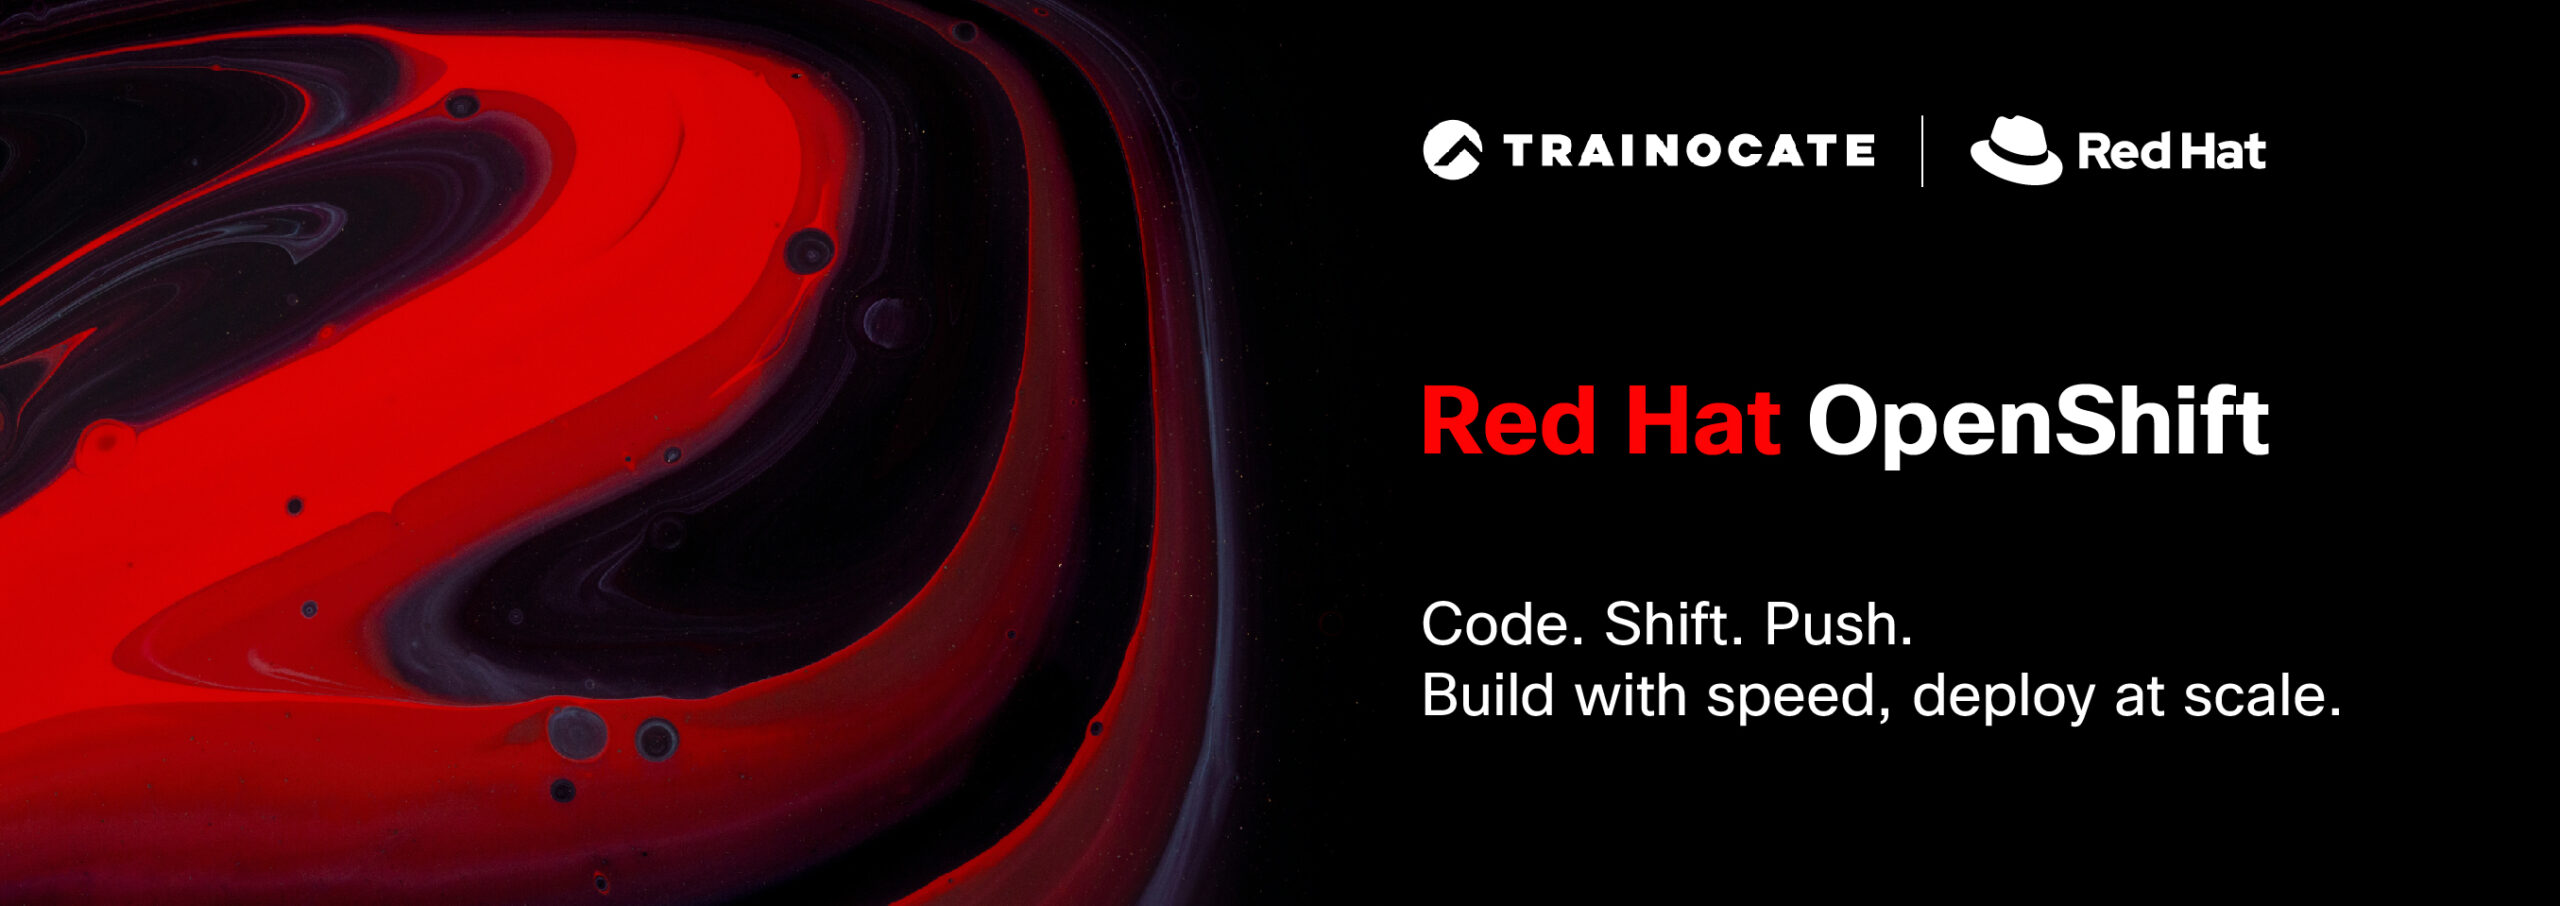 Red Hat OpenShift training